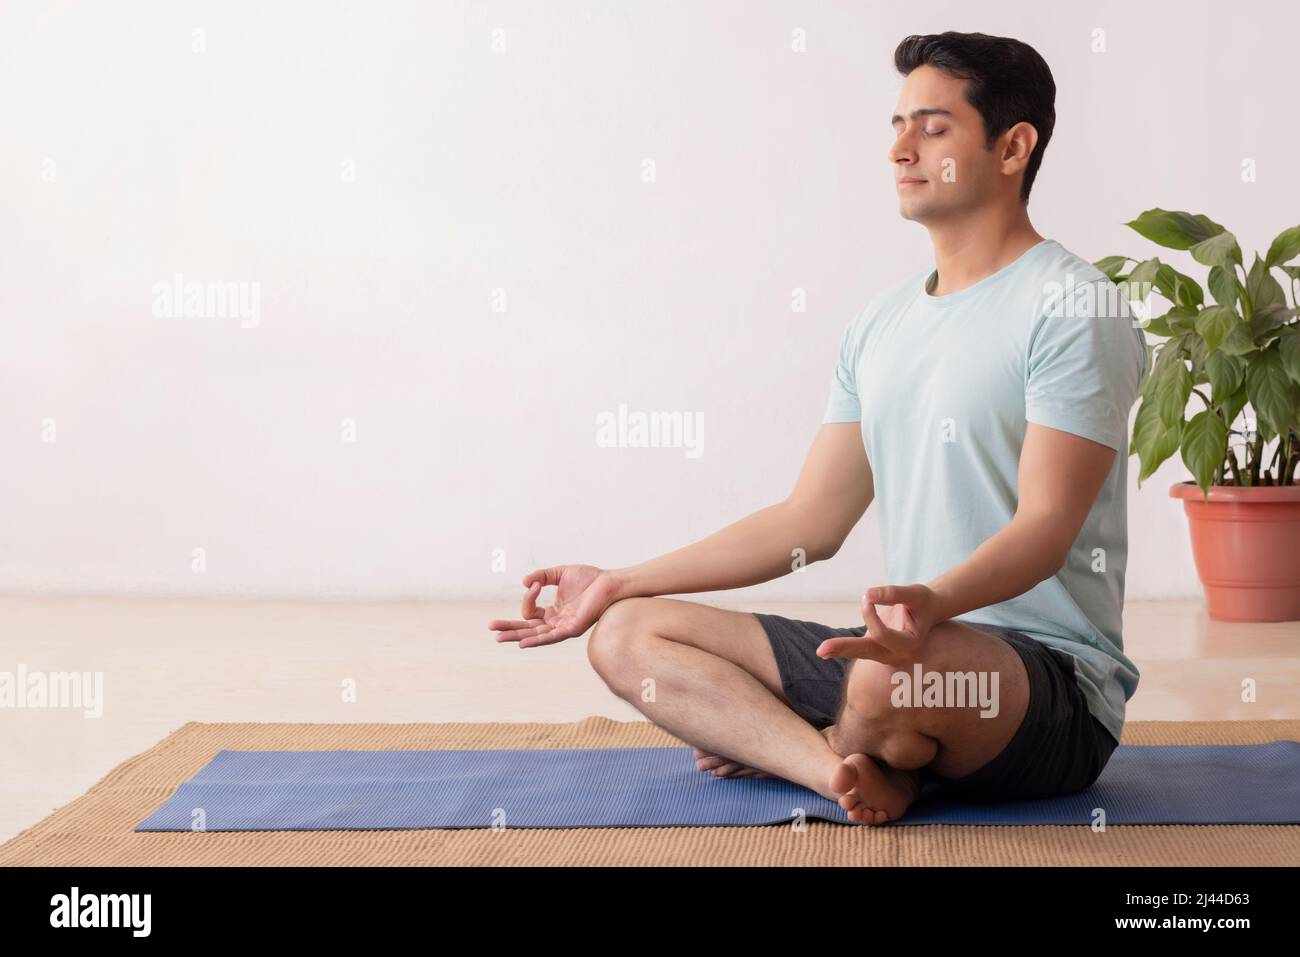 Portrait of a young man meditating at home Stock Photo